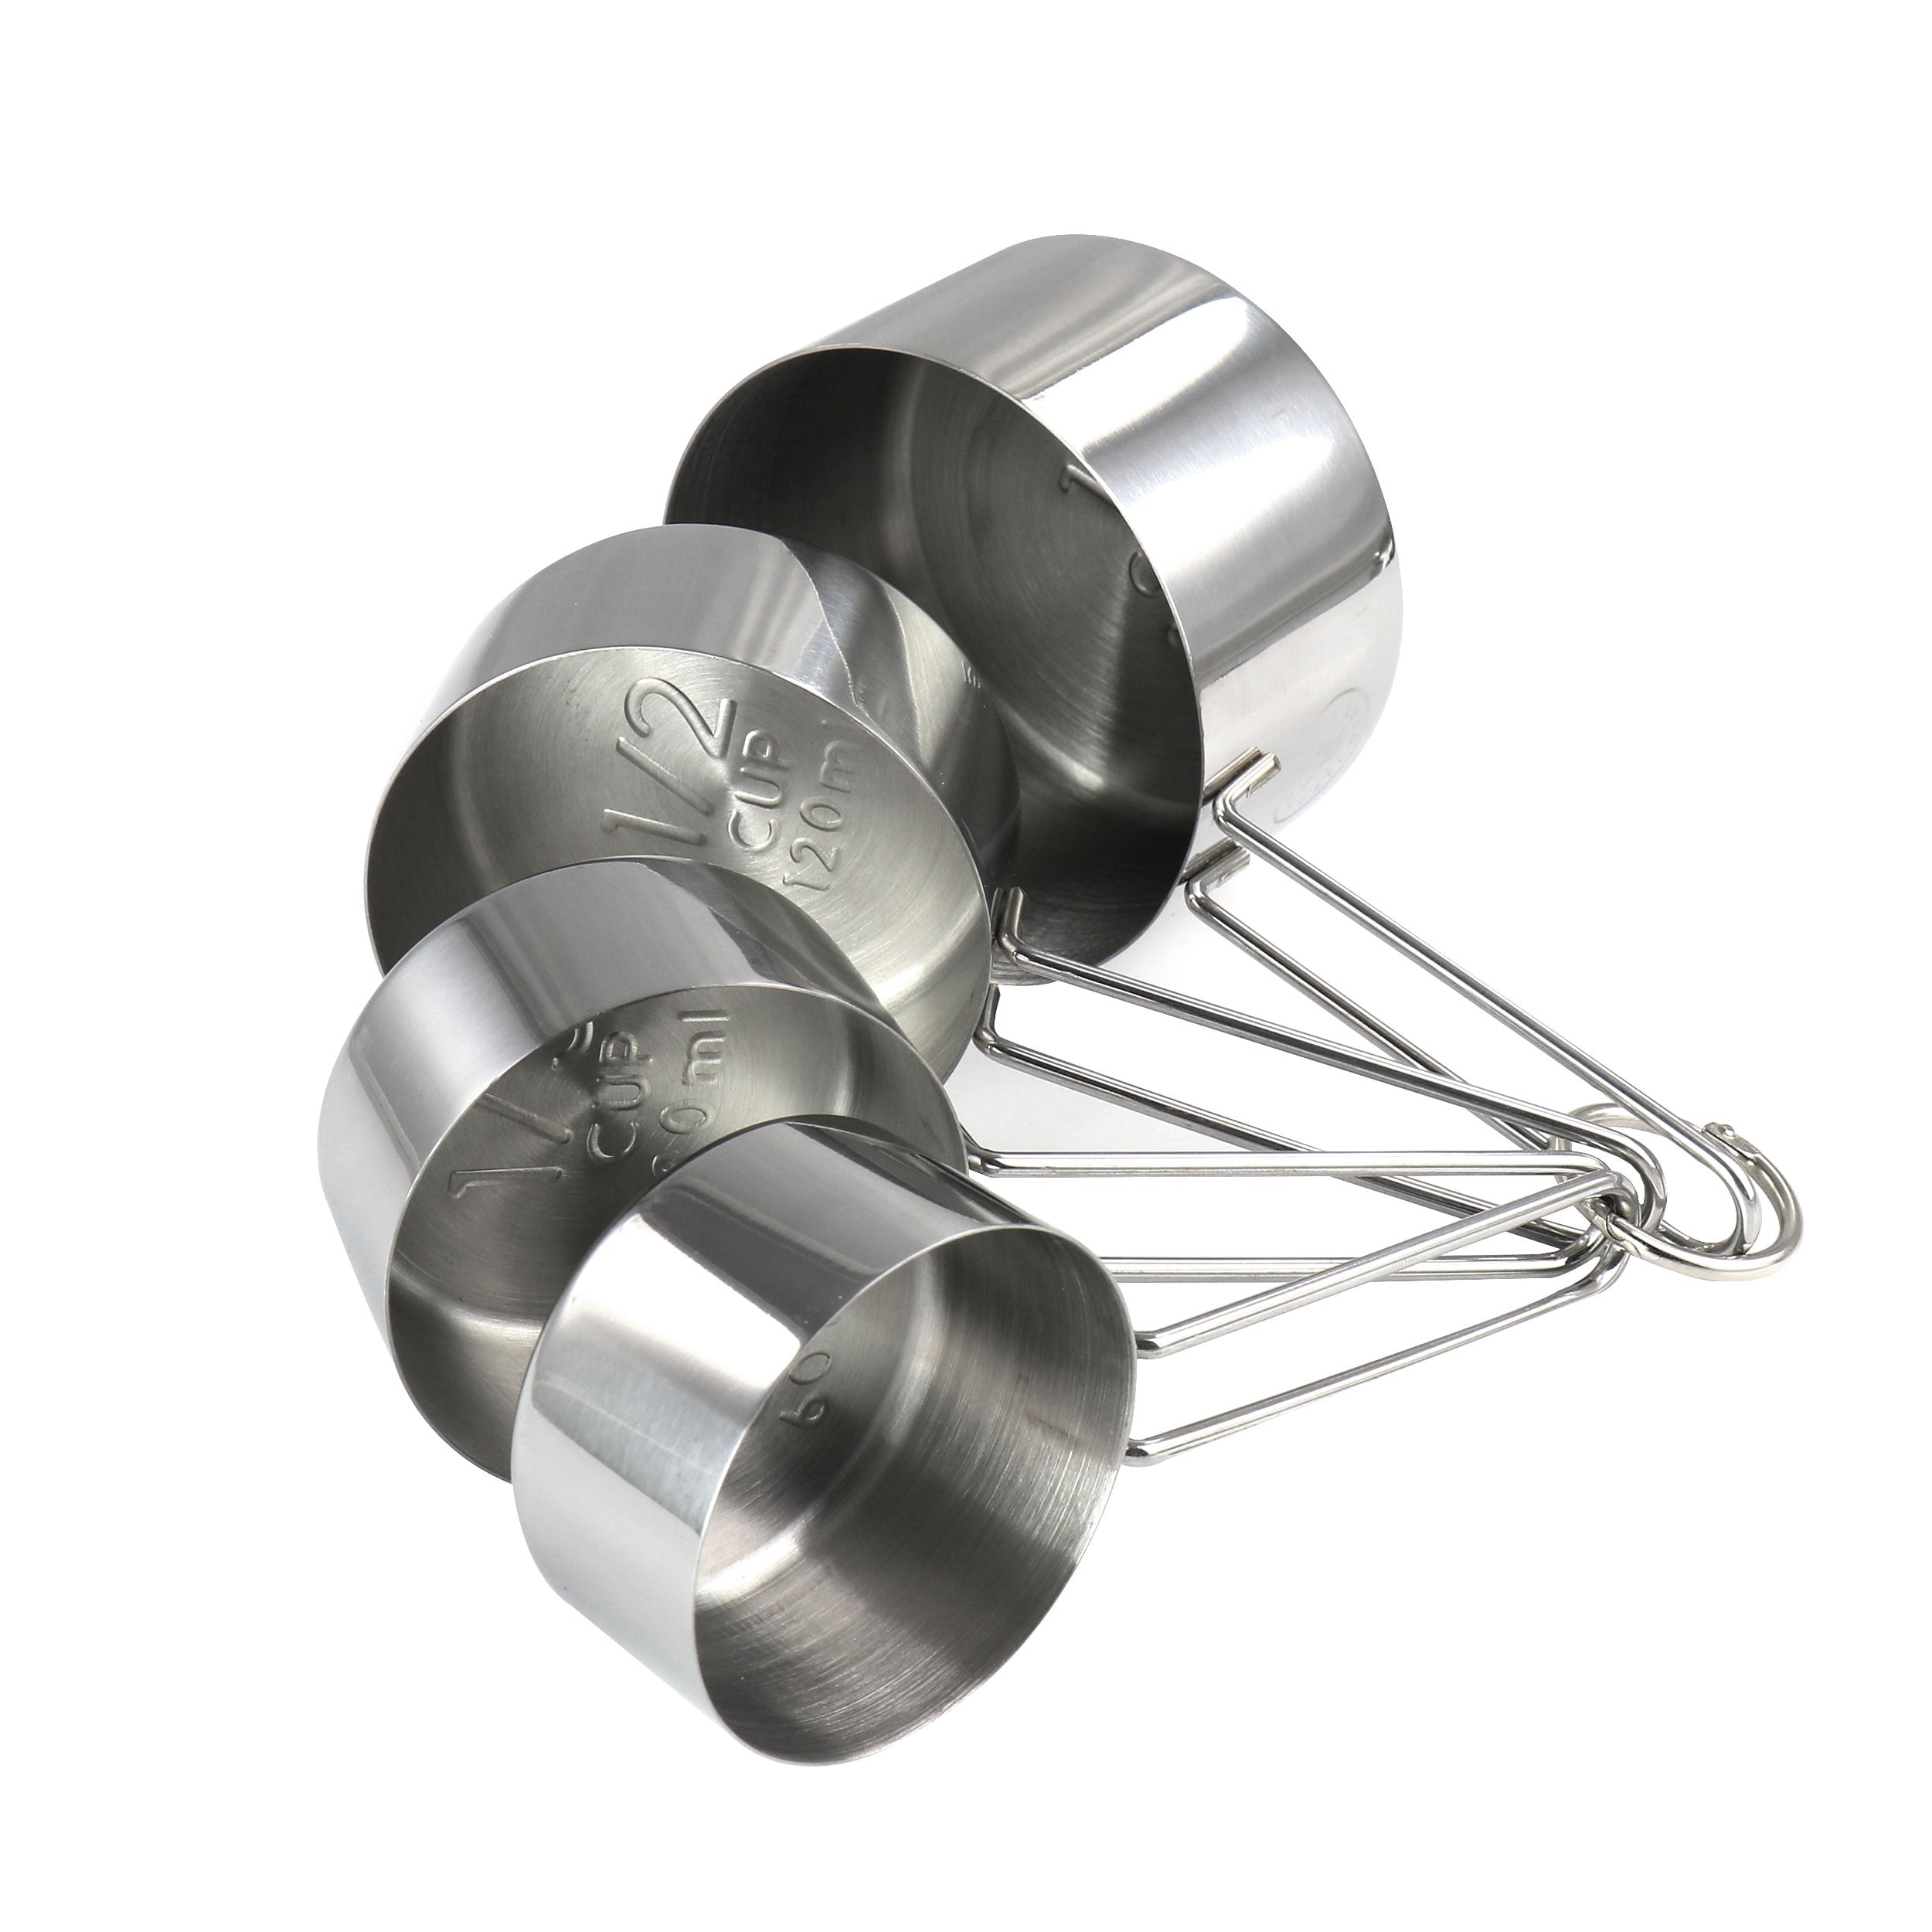 https://ak1.ostkcdn.com/images/products/is/images/direct/16154effad36ee4a5a63abd95308321720ef8ff6/Martha-Stewart-Stainless-Steel-Measuring-Cups.jpg